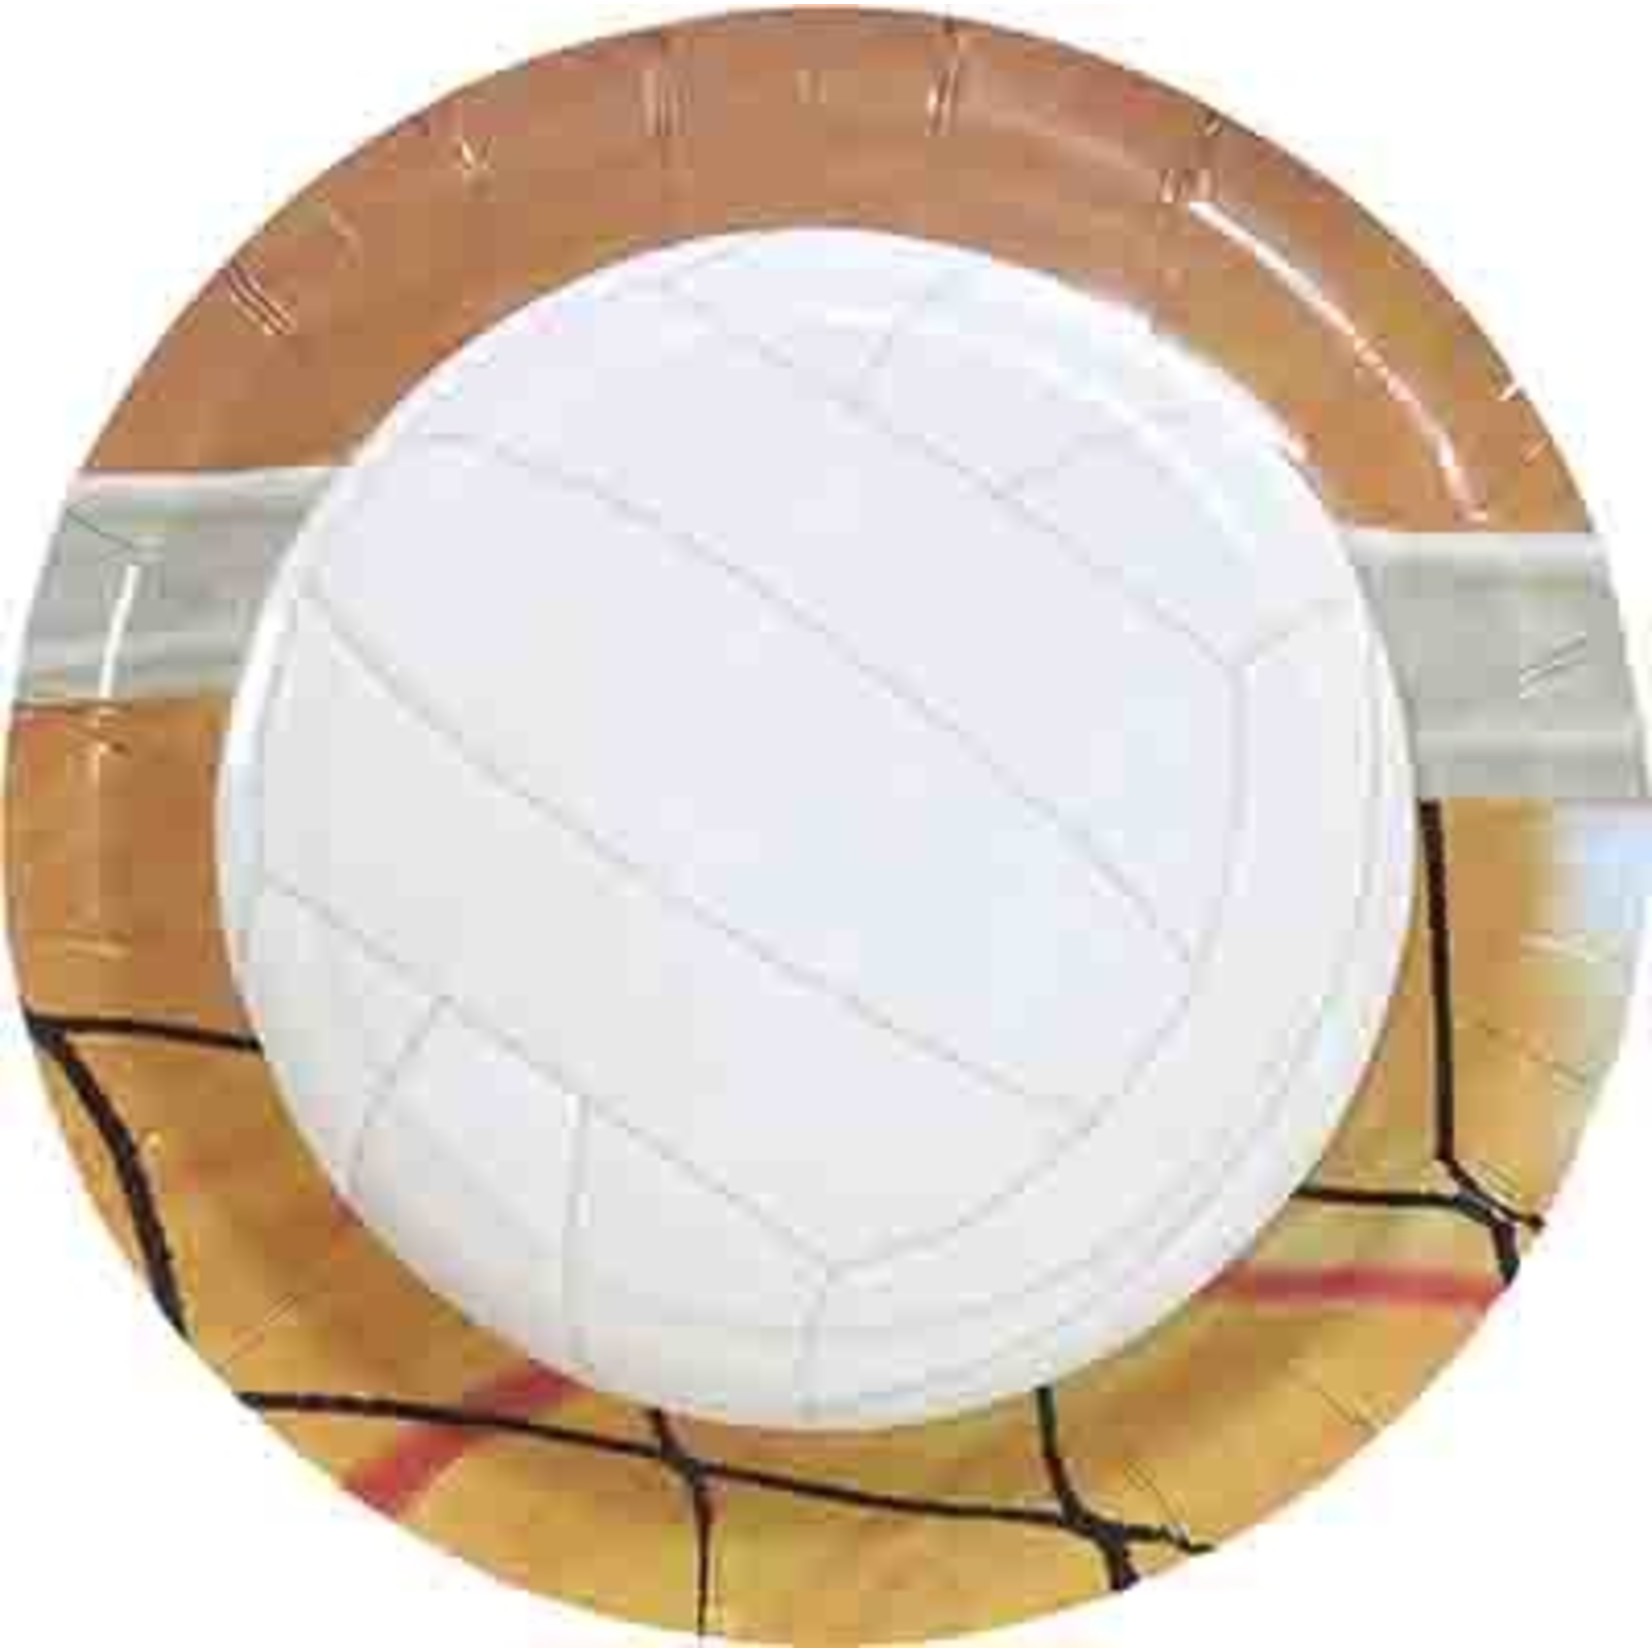 Havercamp 7" Volleyball Plates - 8ct.